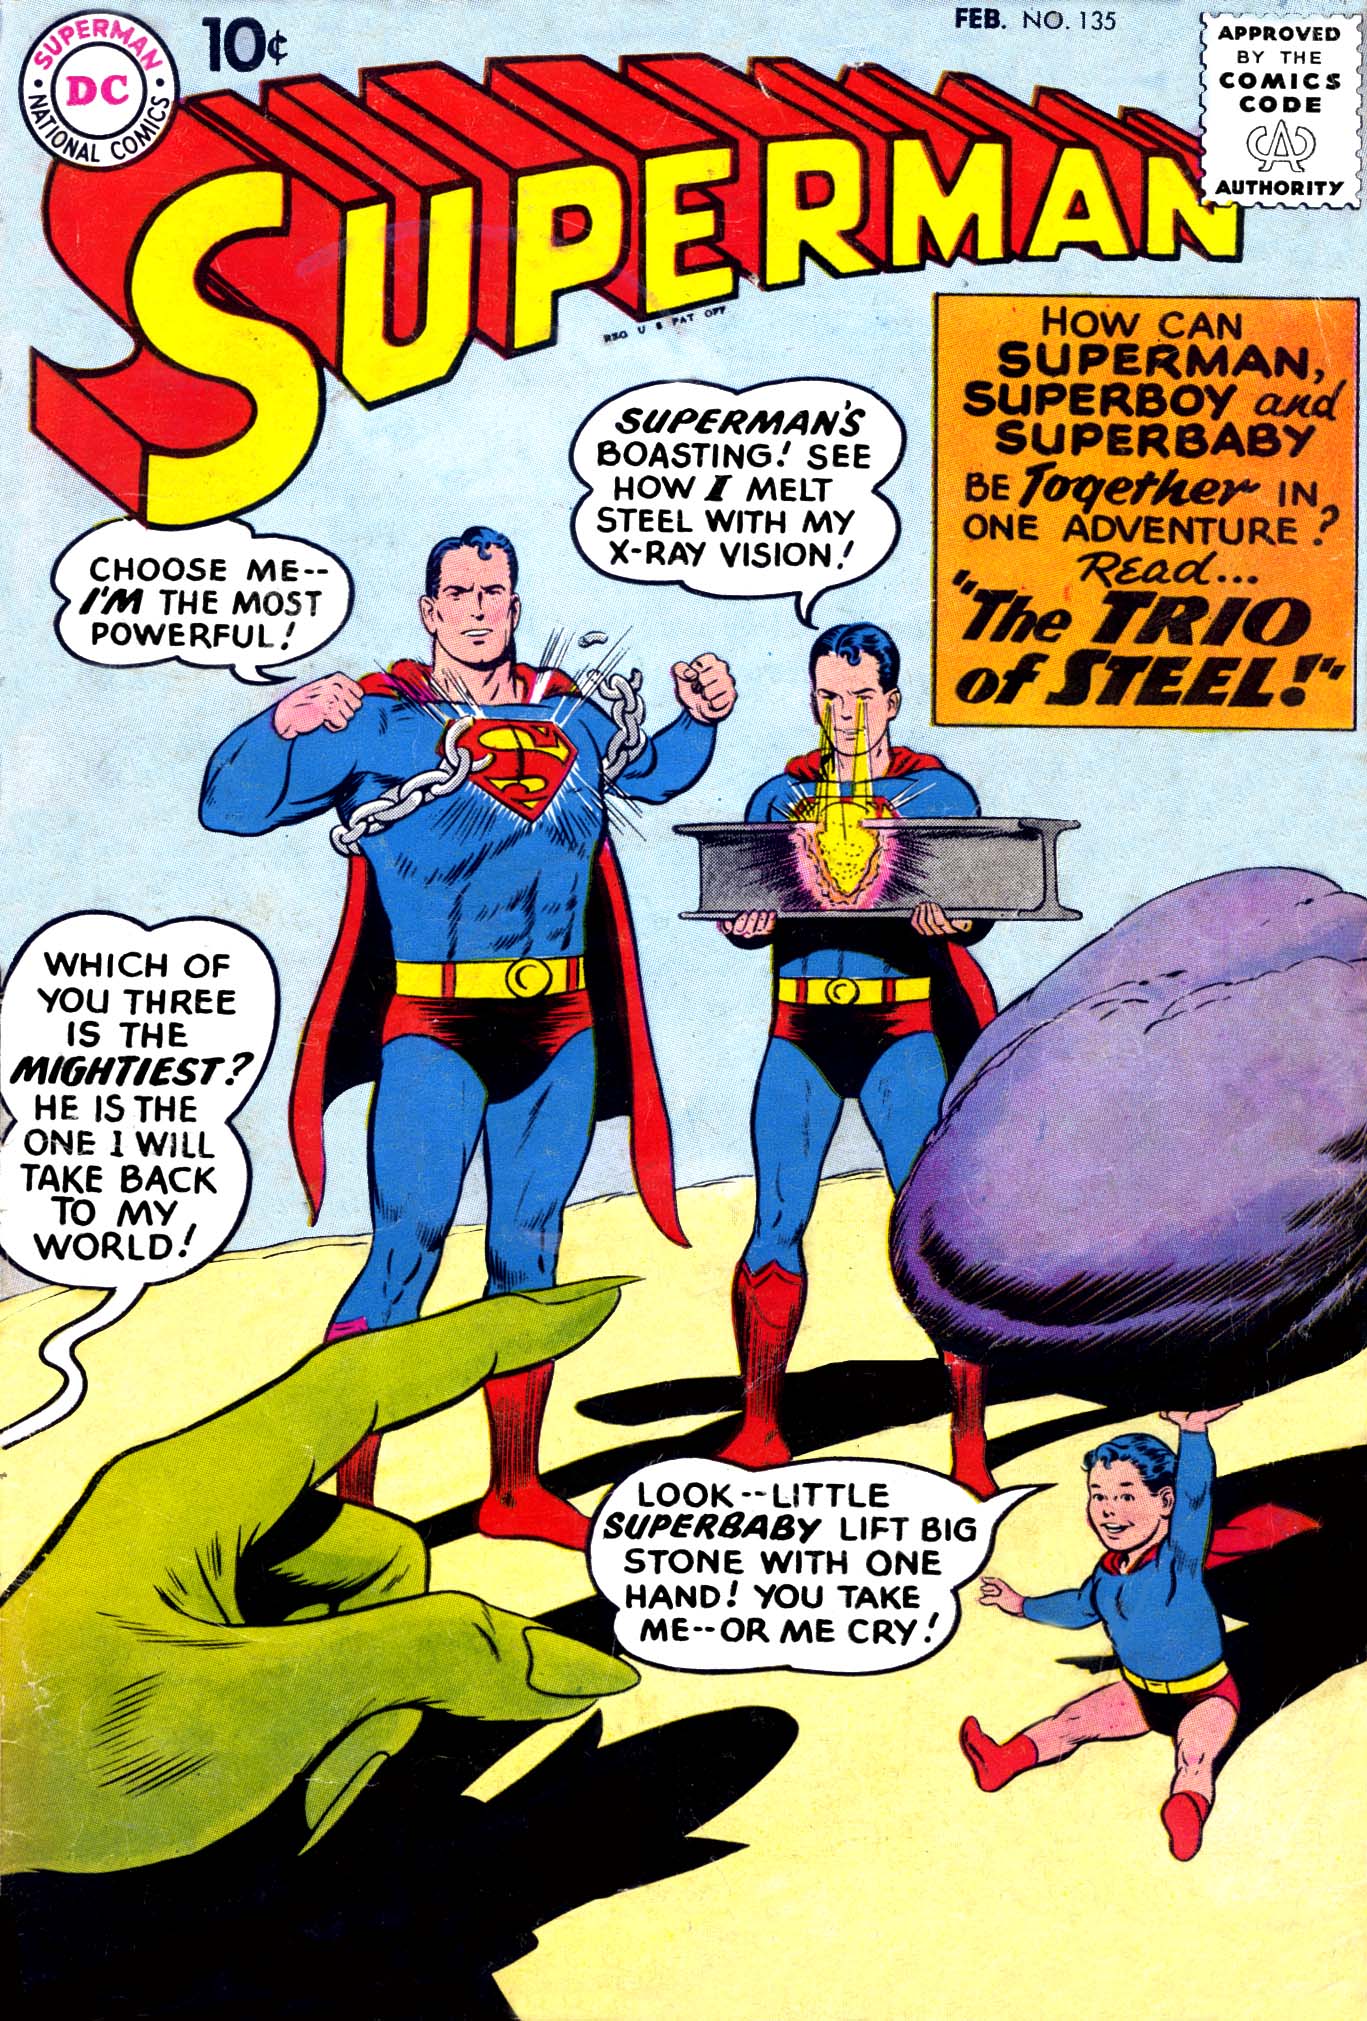 Superman 1939 Issue 153  Read Superman 1939 Issue 153 comic